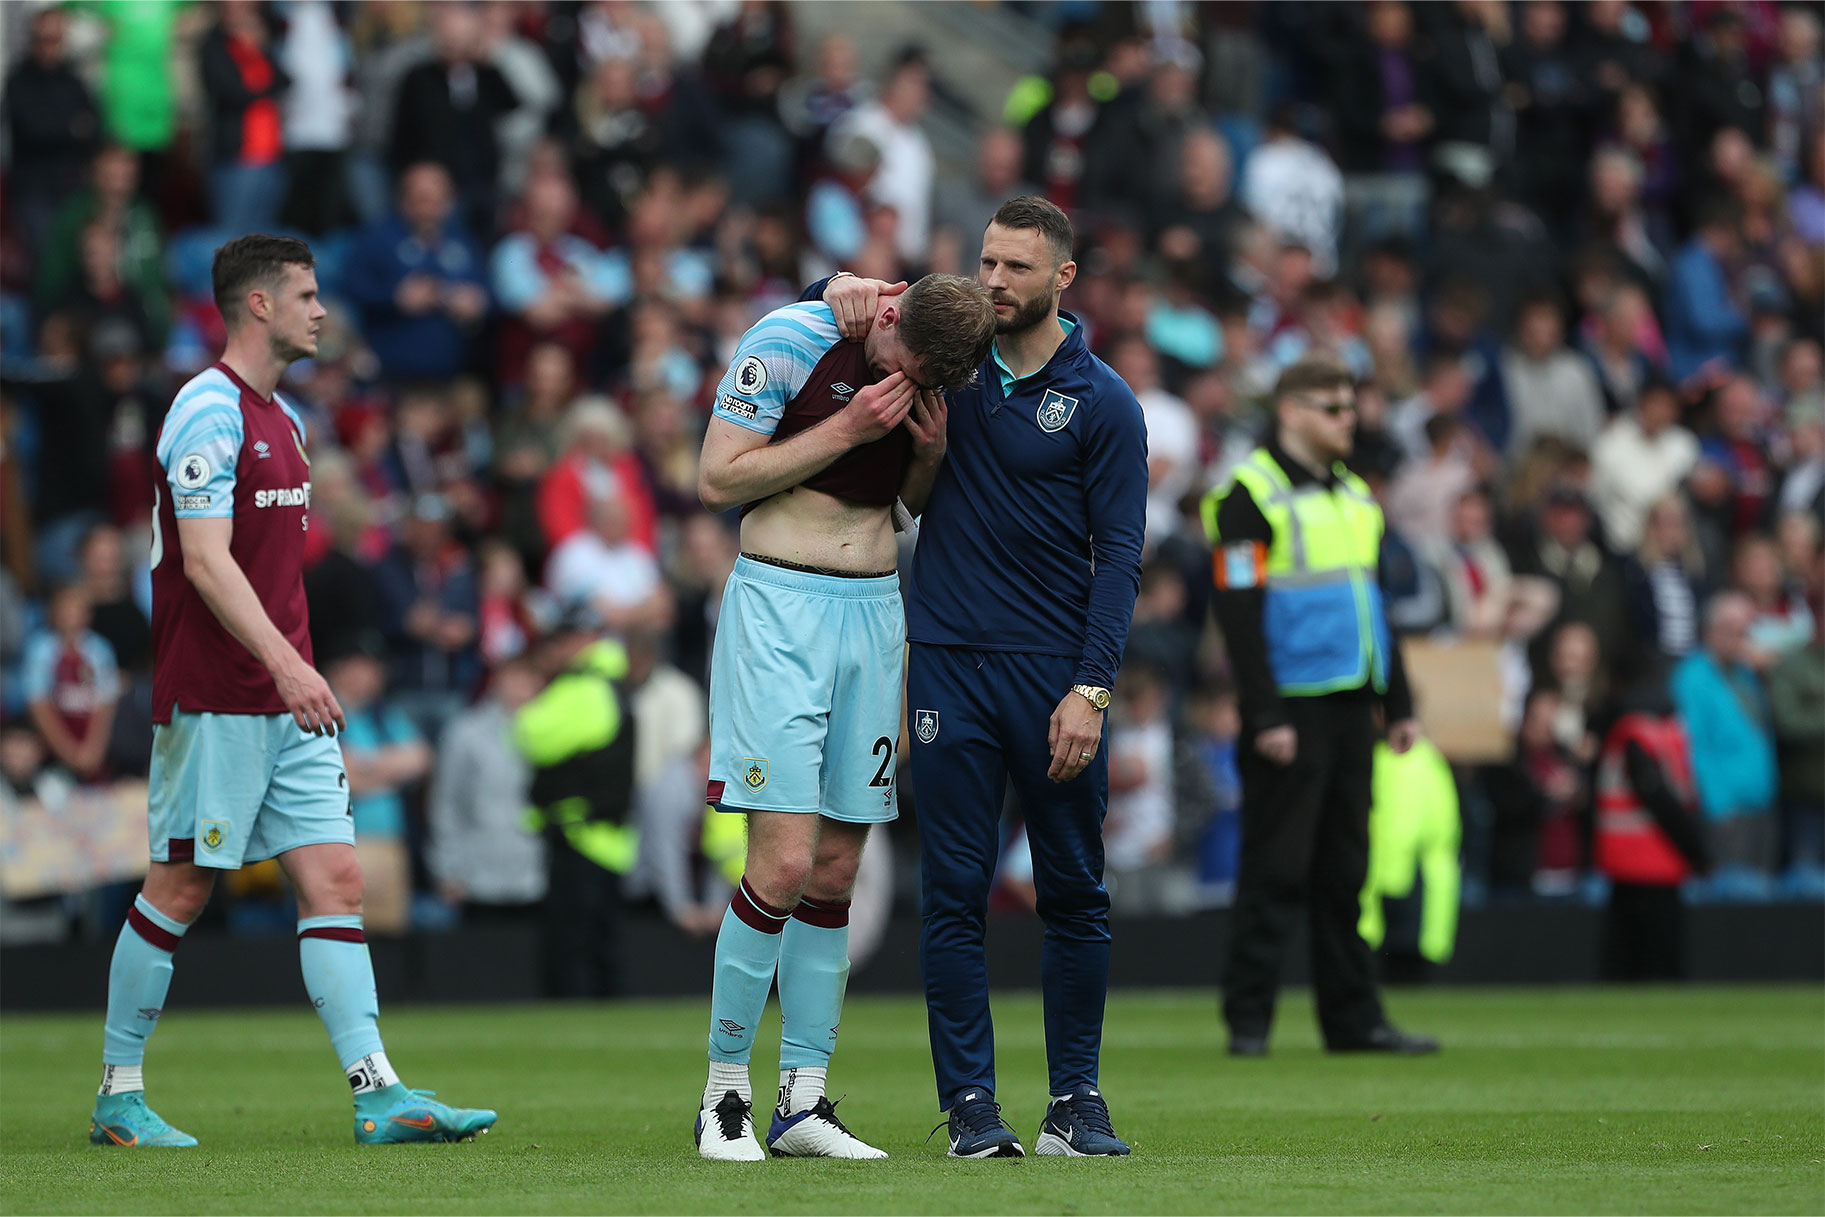 Nathan Collins of Burnley in tears after their defeat and relegation  during the Premier League match between Burnley and Newcastle United at Turf Moor